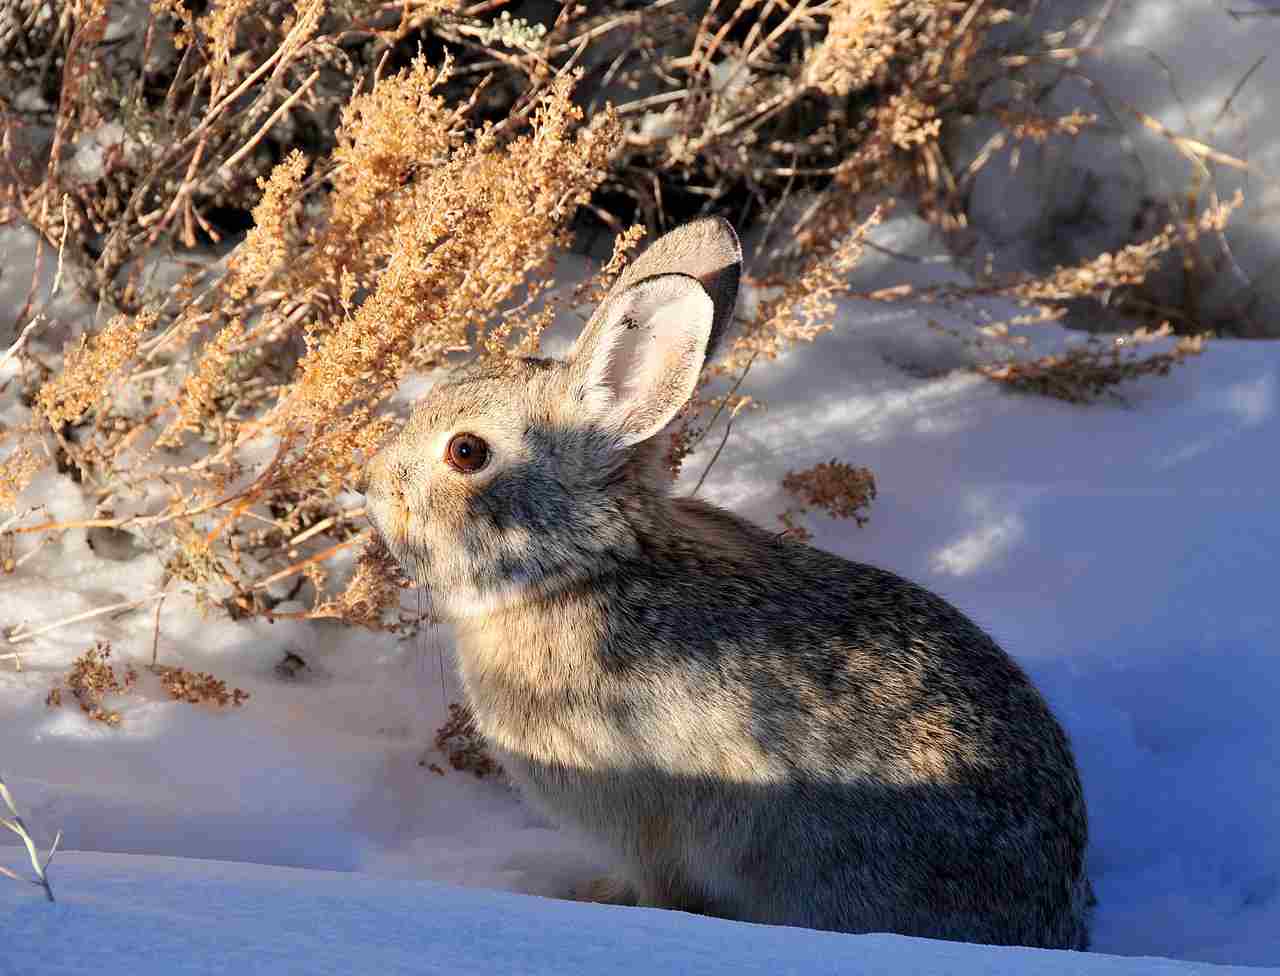 What Do Rabbits Eat in the Winter: Pine Needles and Twigs Can be Consumed by Rabbits in Winter (Credit: USFWS Mountain-Prairie 2013 .CC BY 2.0.)